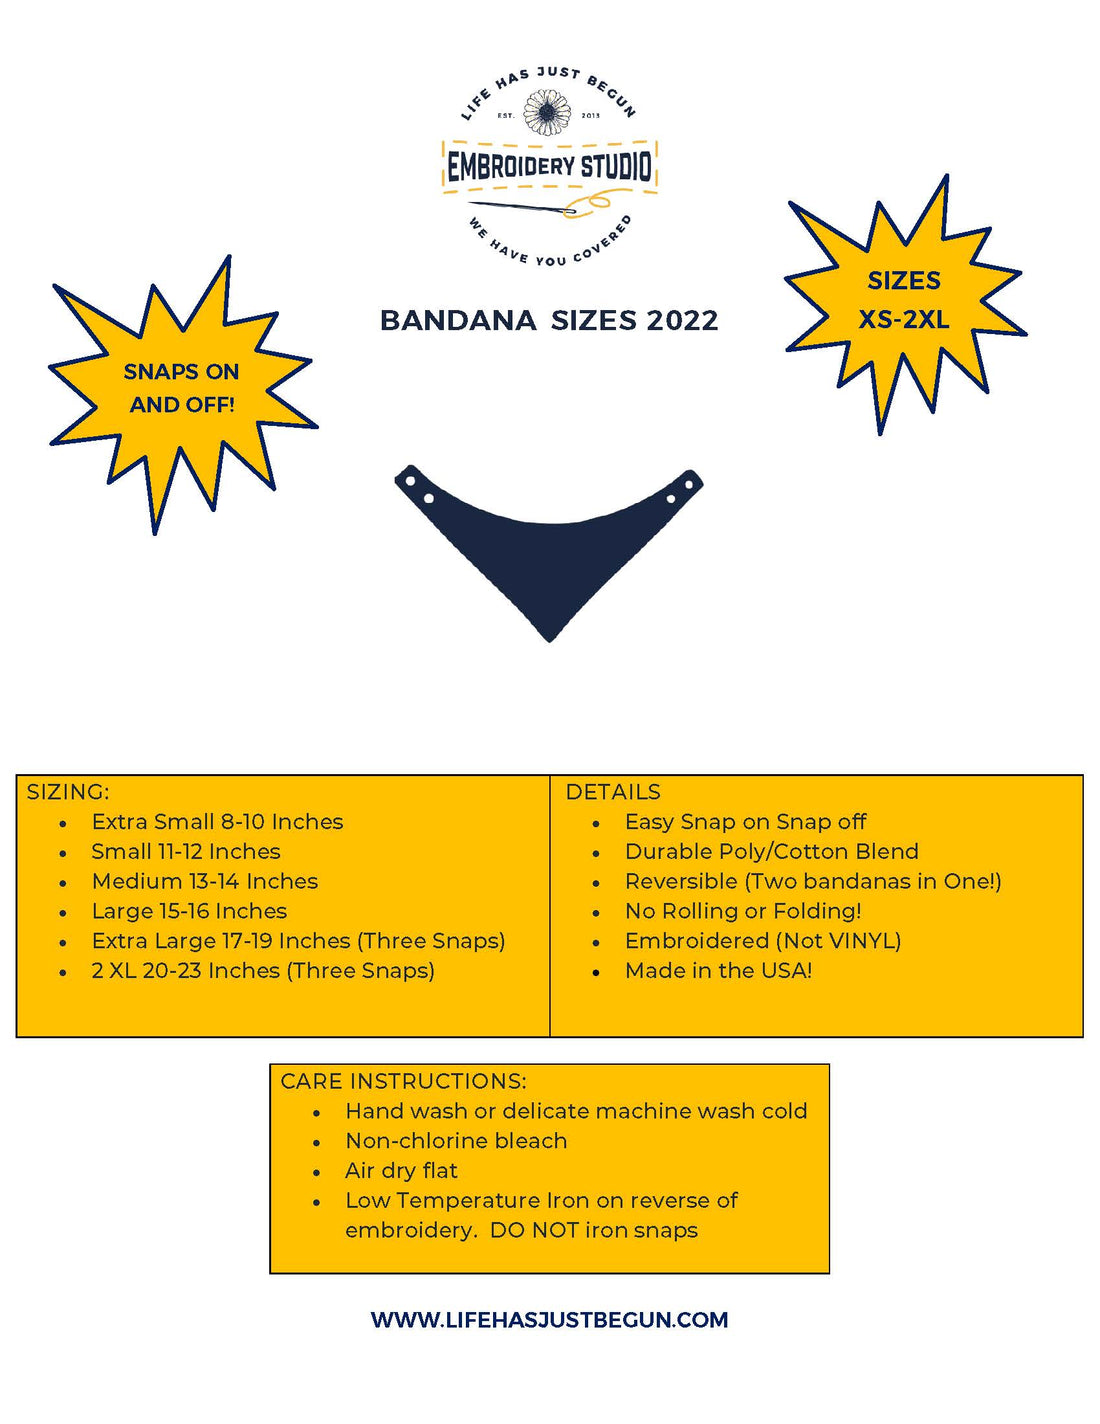 Dog Bandana Sizes, details and care instructions - Life Has Just Begun